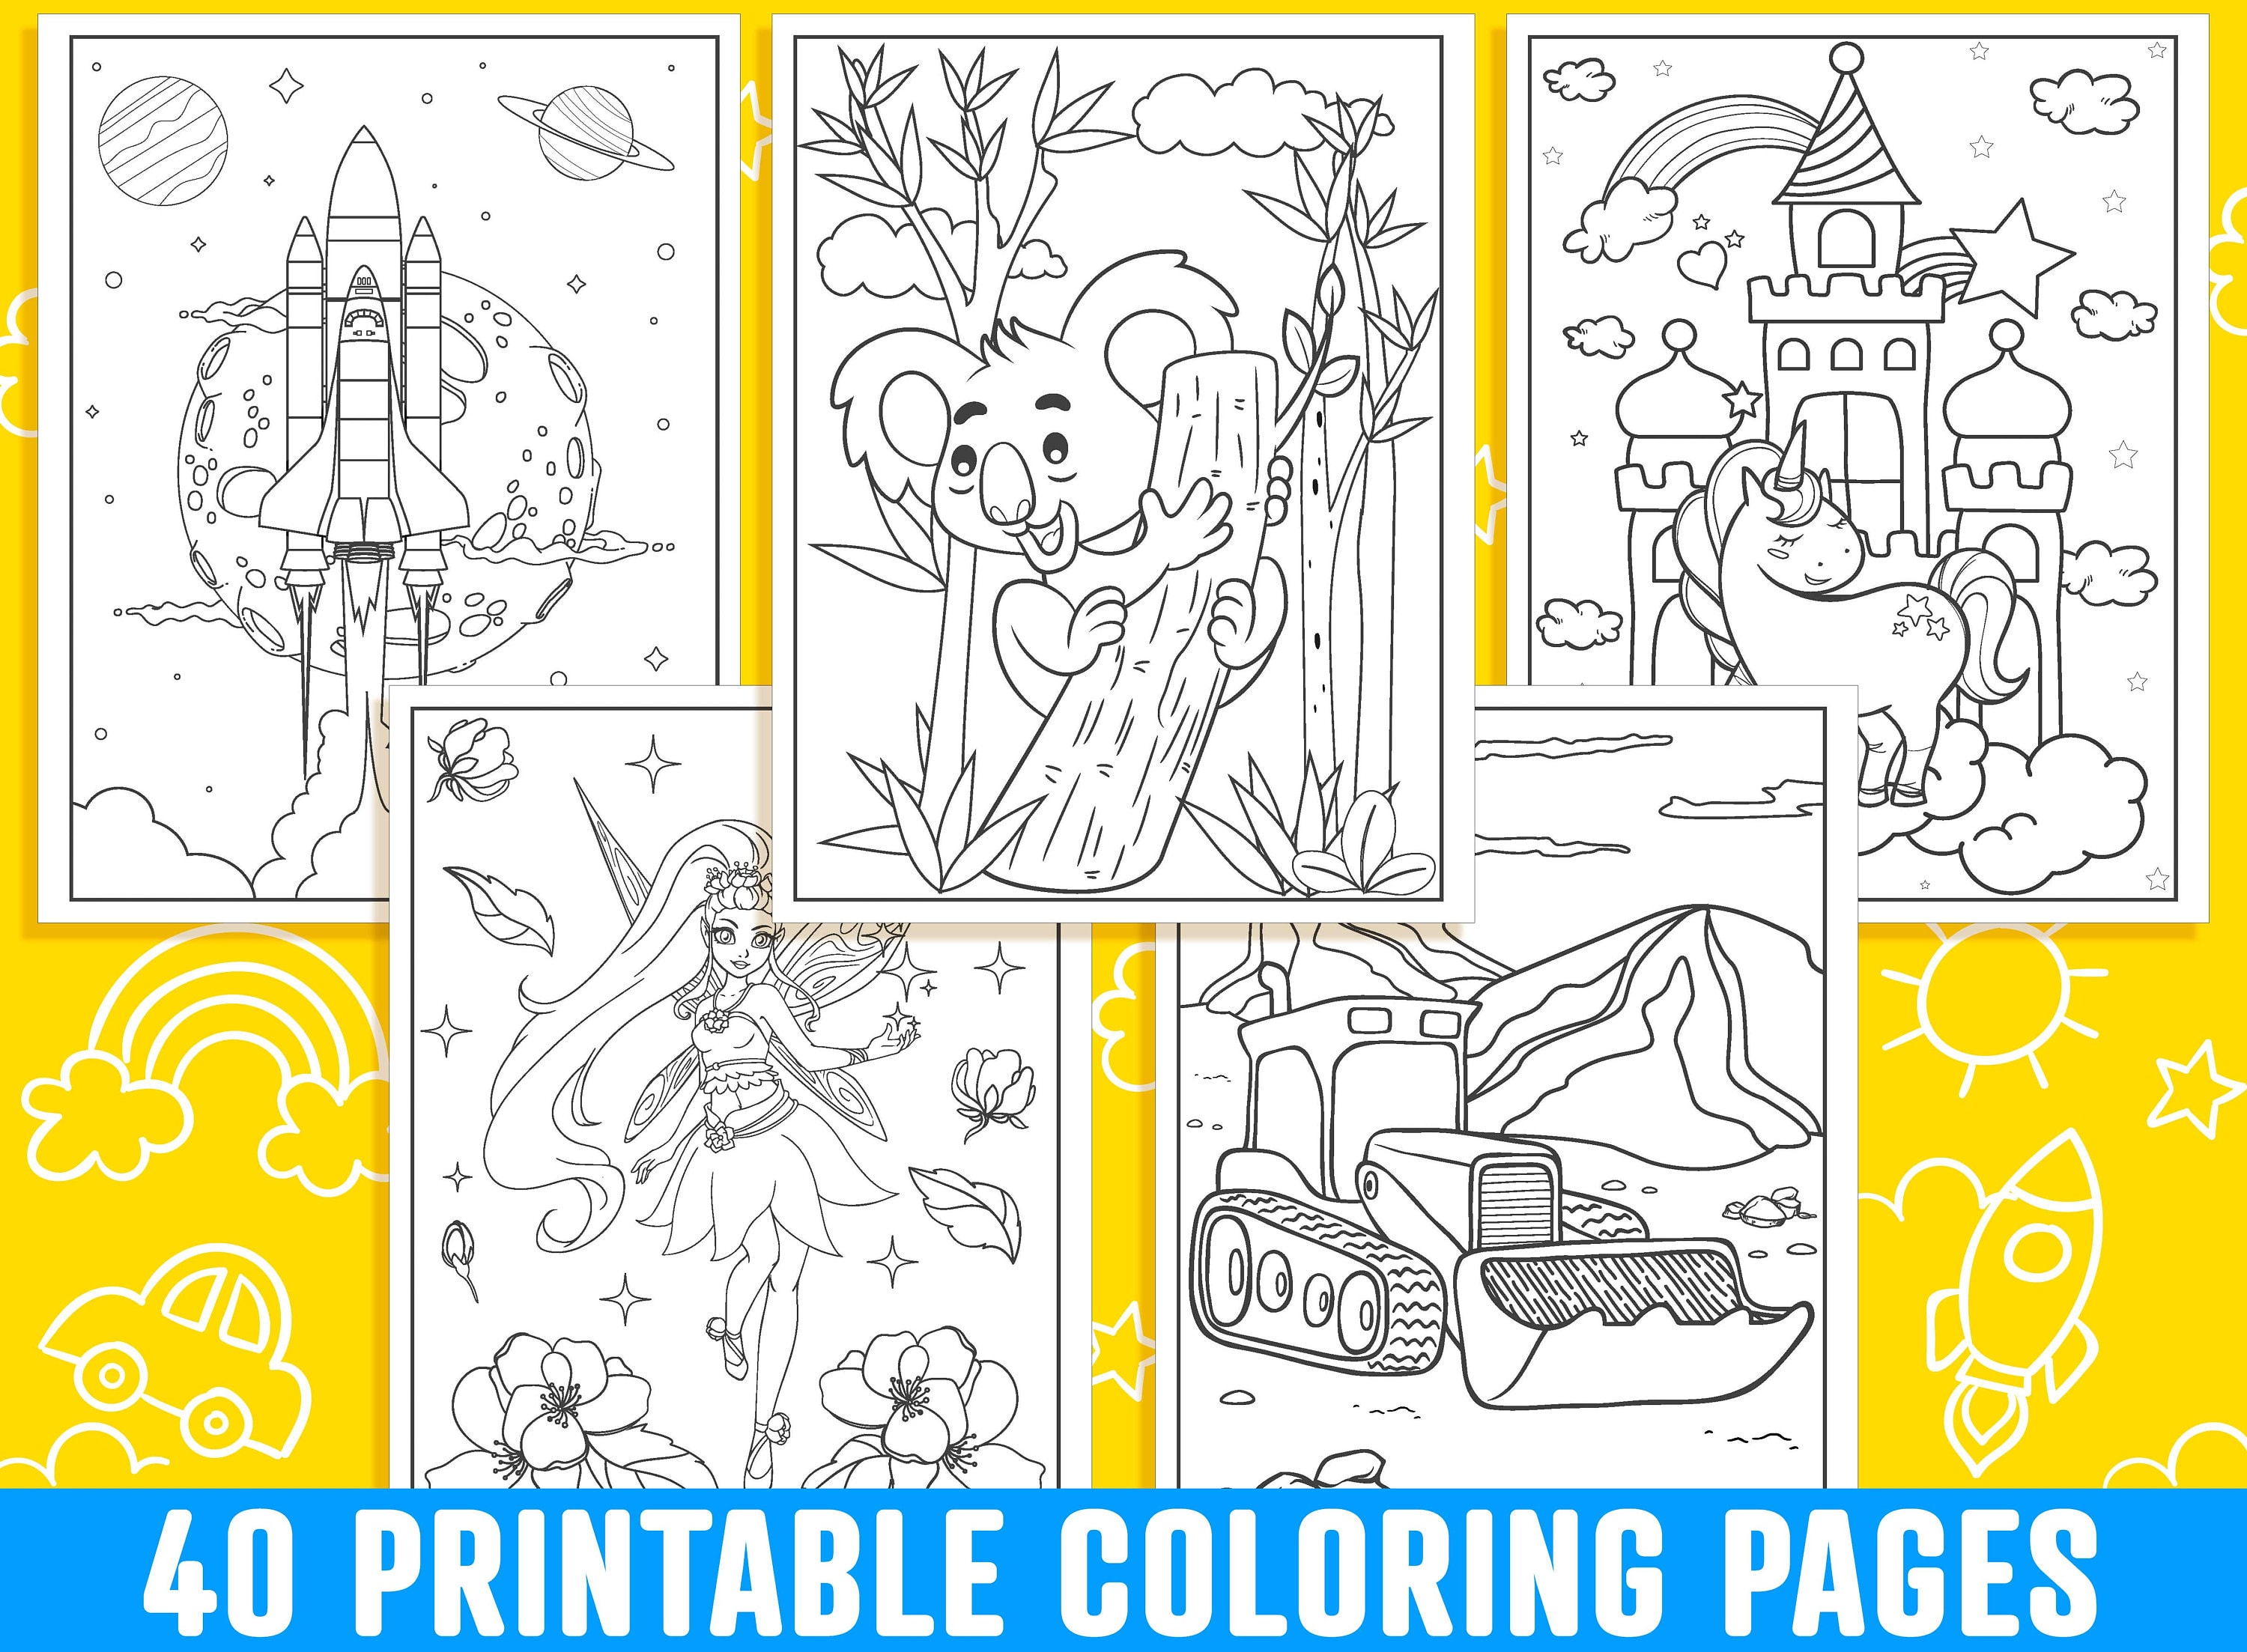 Kids Coloring Pages, 20 Printable Coloring Pages for Kids, Boys, Girls,  Teens. Coloring Book for Kids, Party Activity, PDF, Instant Download